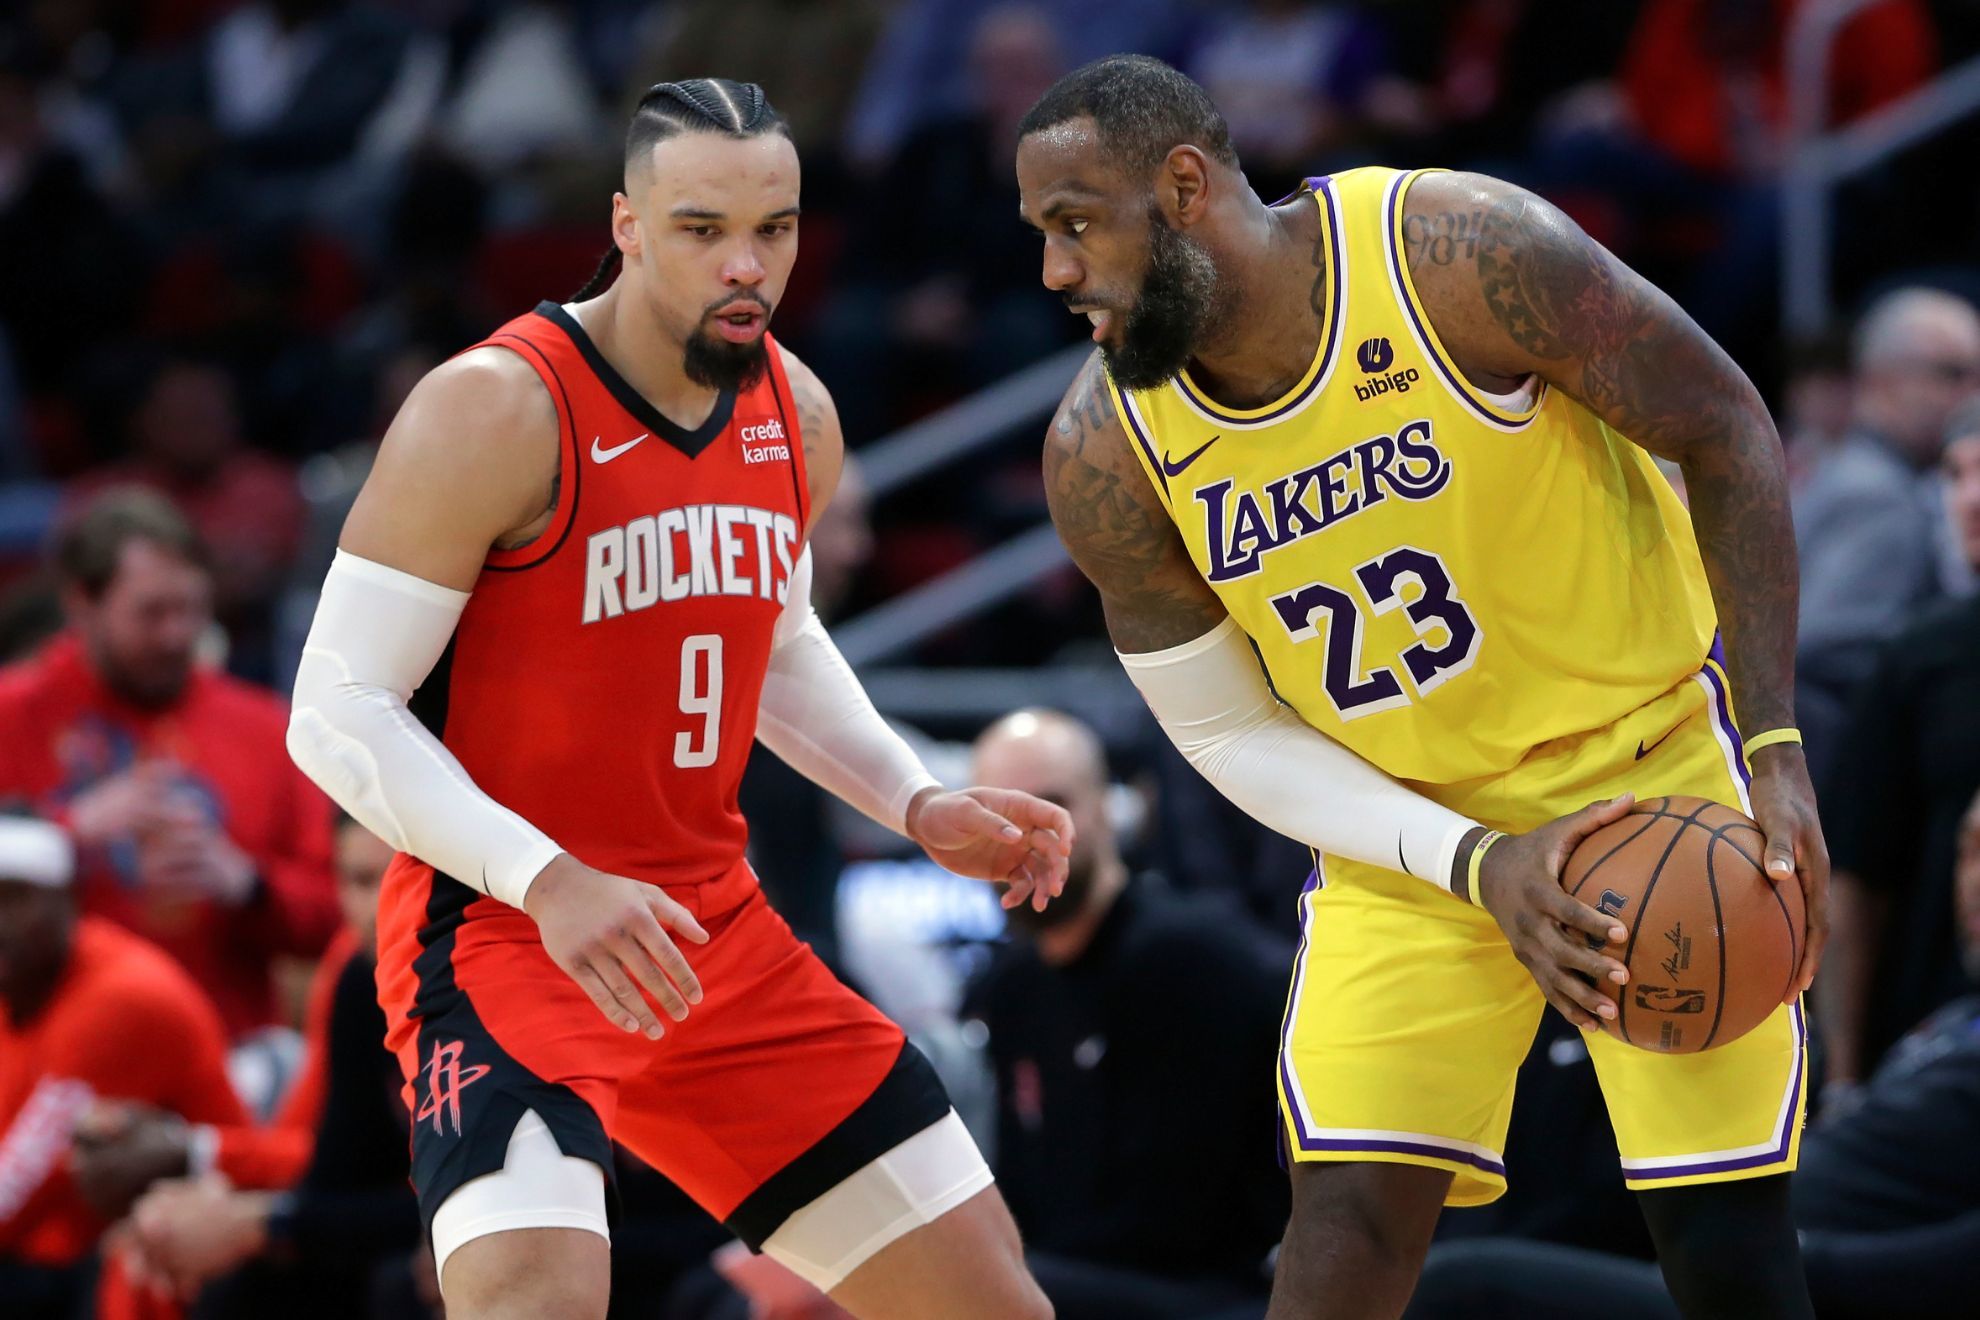 Dillon Brooks reignites beef with LeBron James as Rockets dominate Lakers